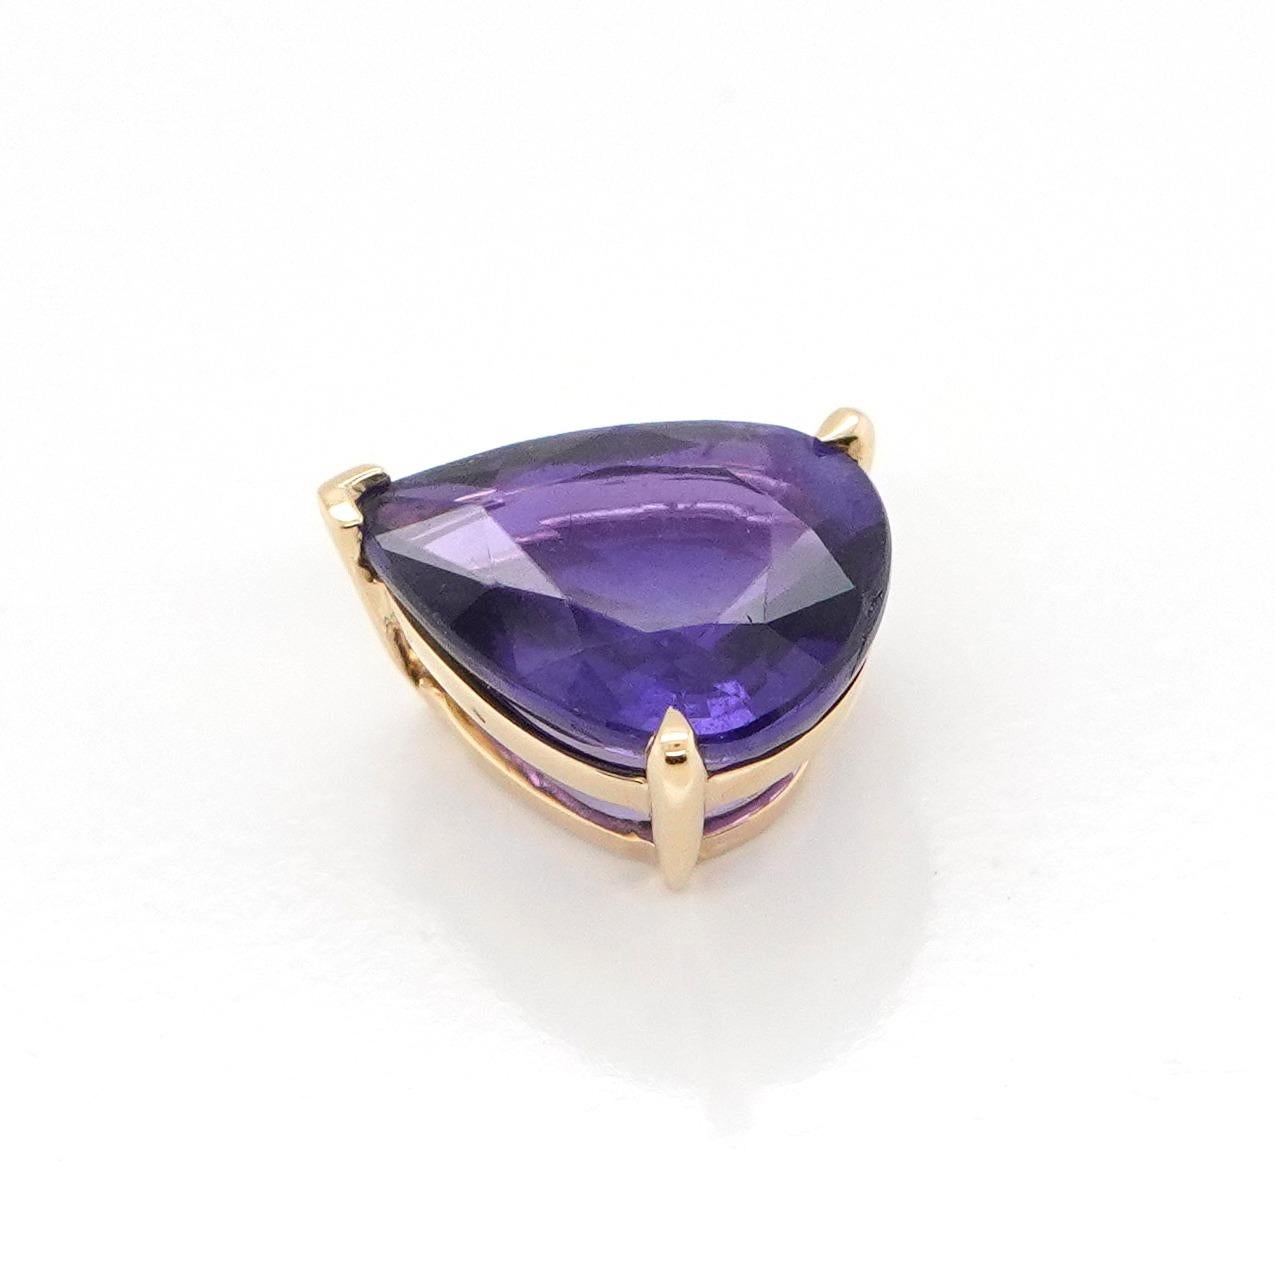 18K yellow gold with natural purple sapphire 2.24 carat 2.88 grams 